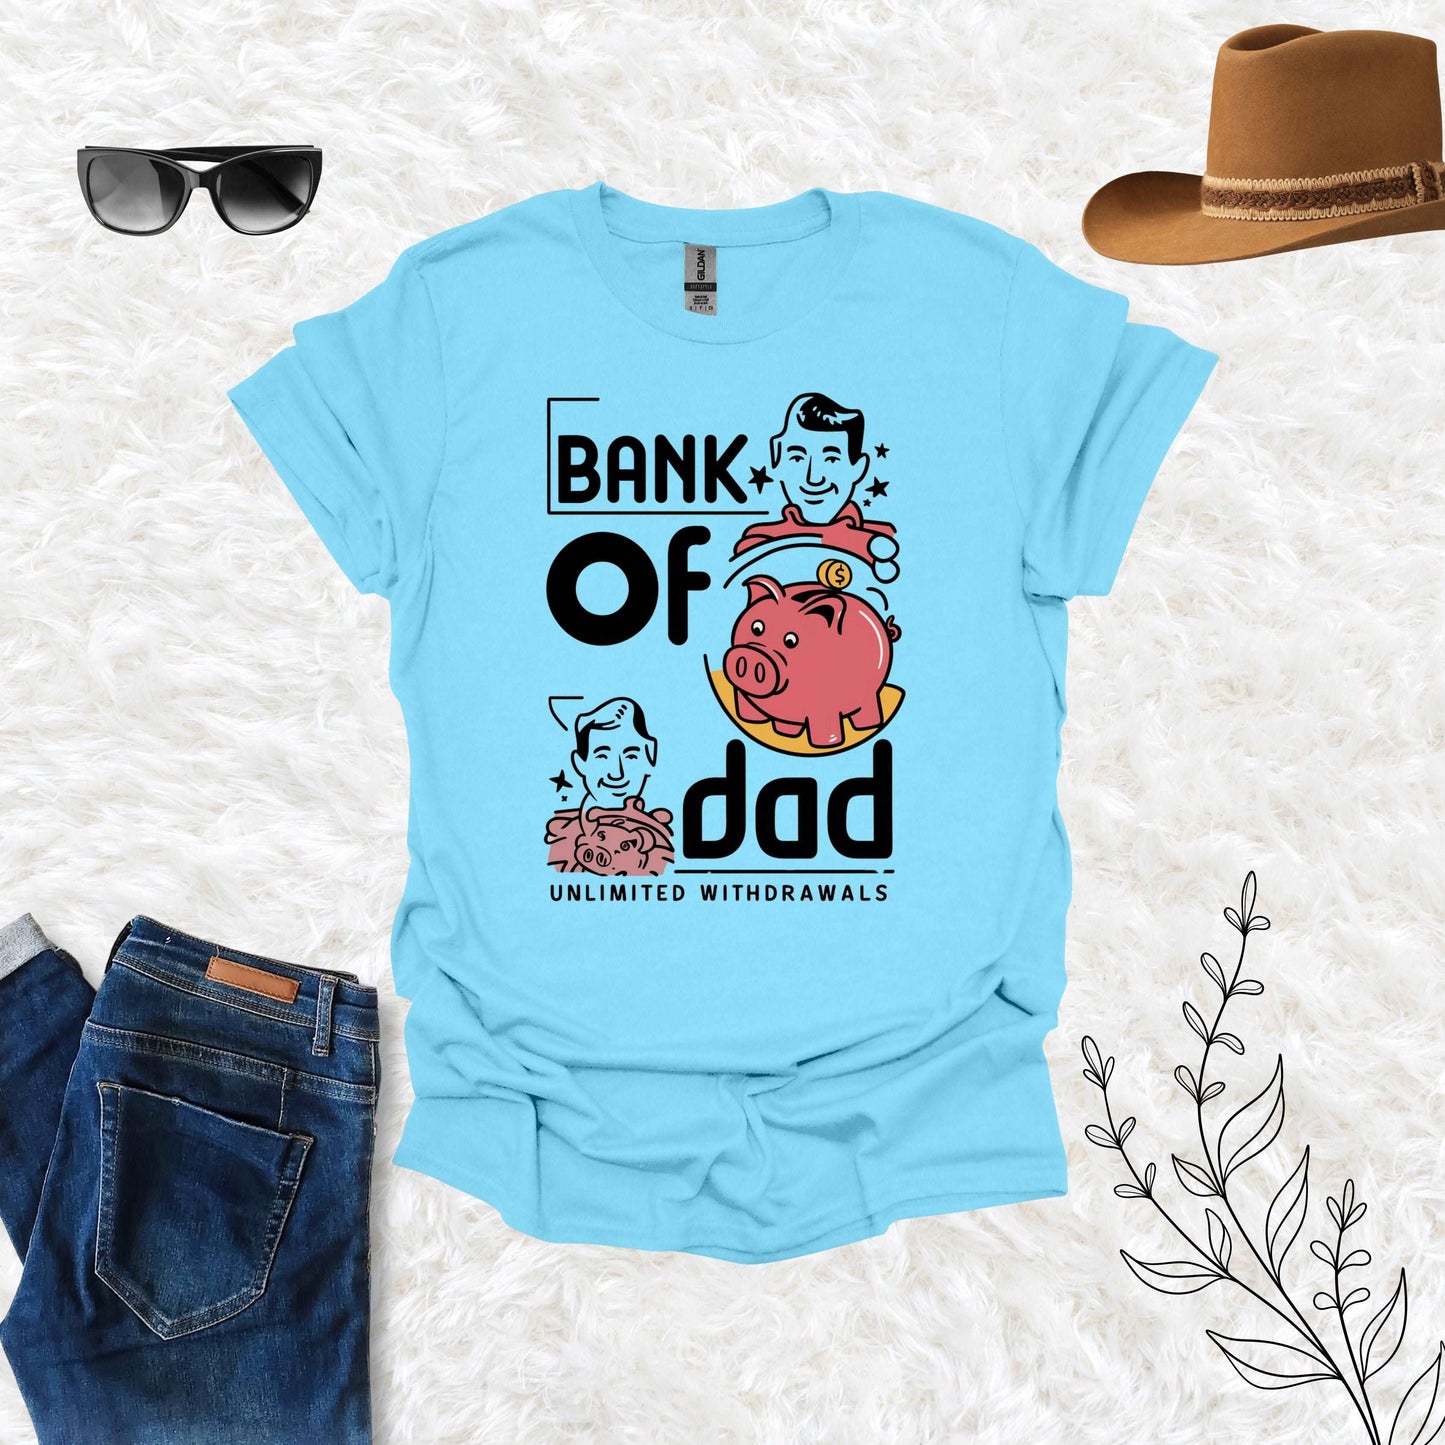 Bank of Dad Sky Shirt - Unlimited Withdrawal from My Father